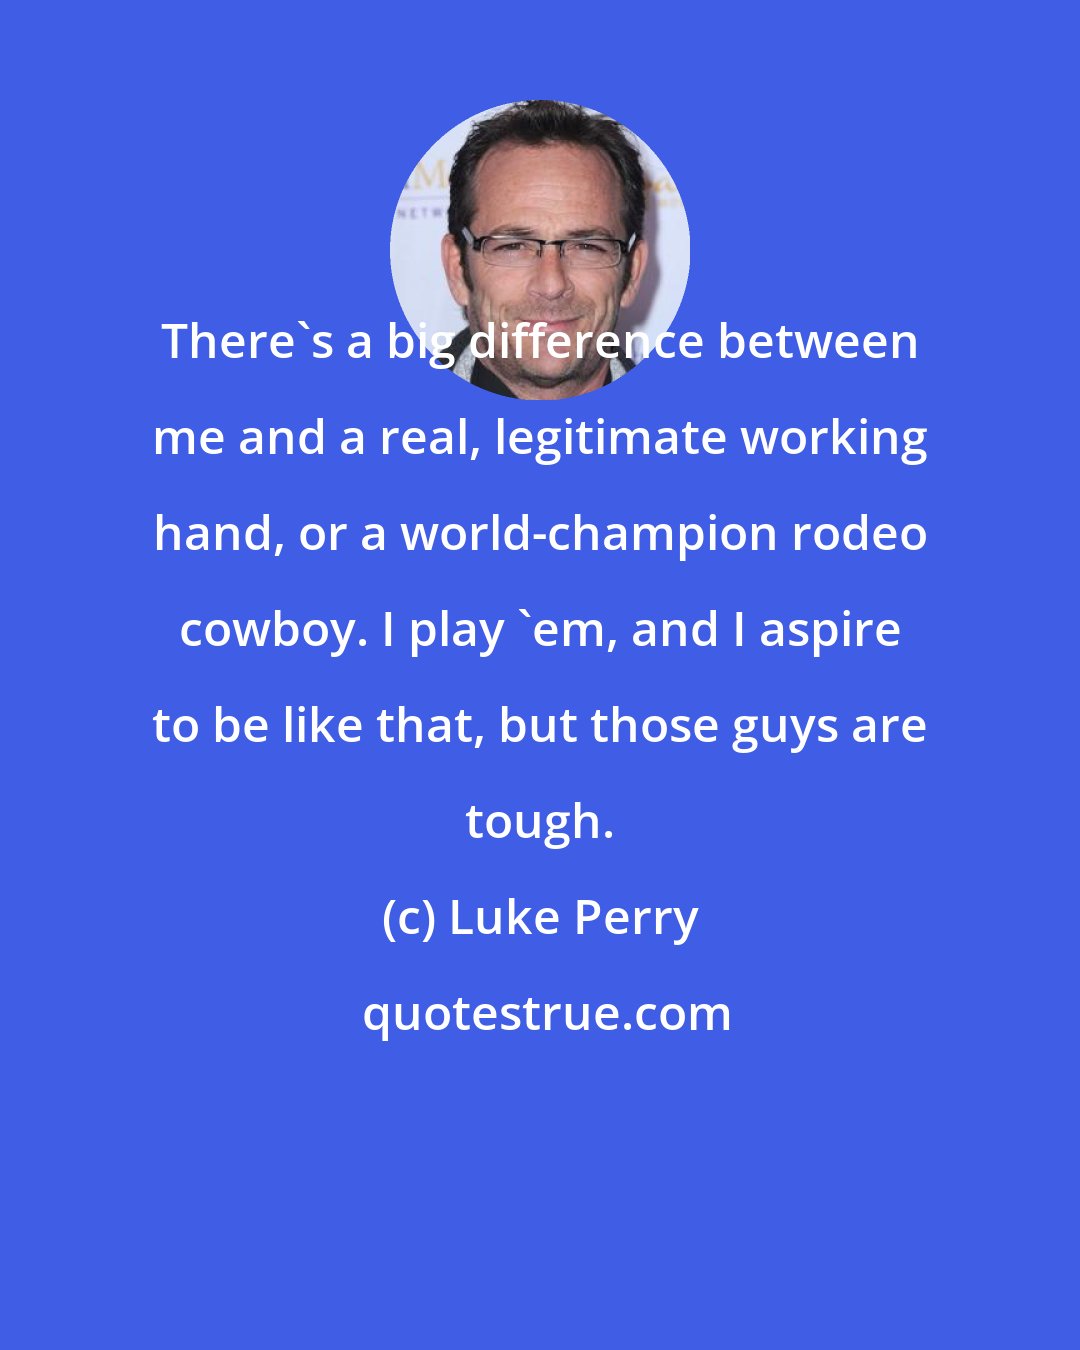 Luke Perry: There's a big difference between me and a real, legitimate working hand, or a world-champion rodeo cowboy. I play 'em, and I aspire to be like that, but those guys are tough.